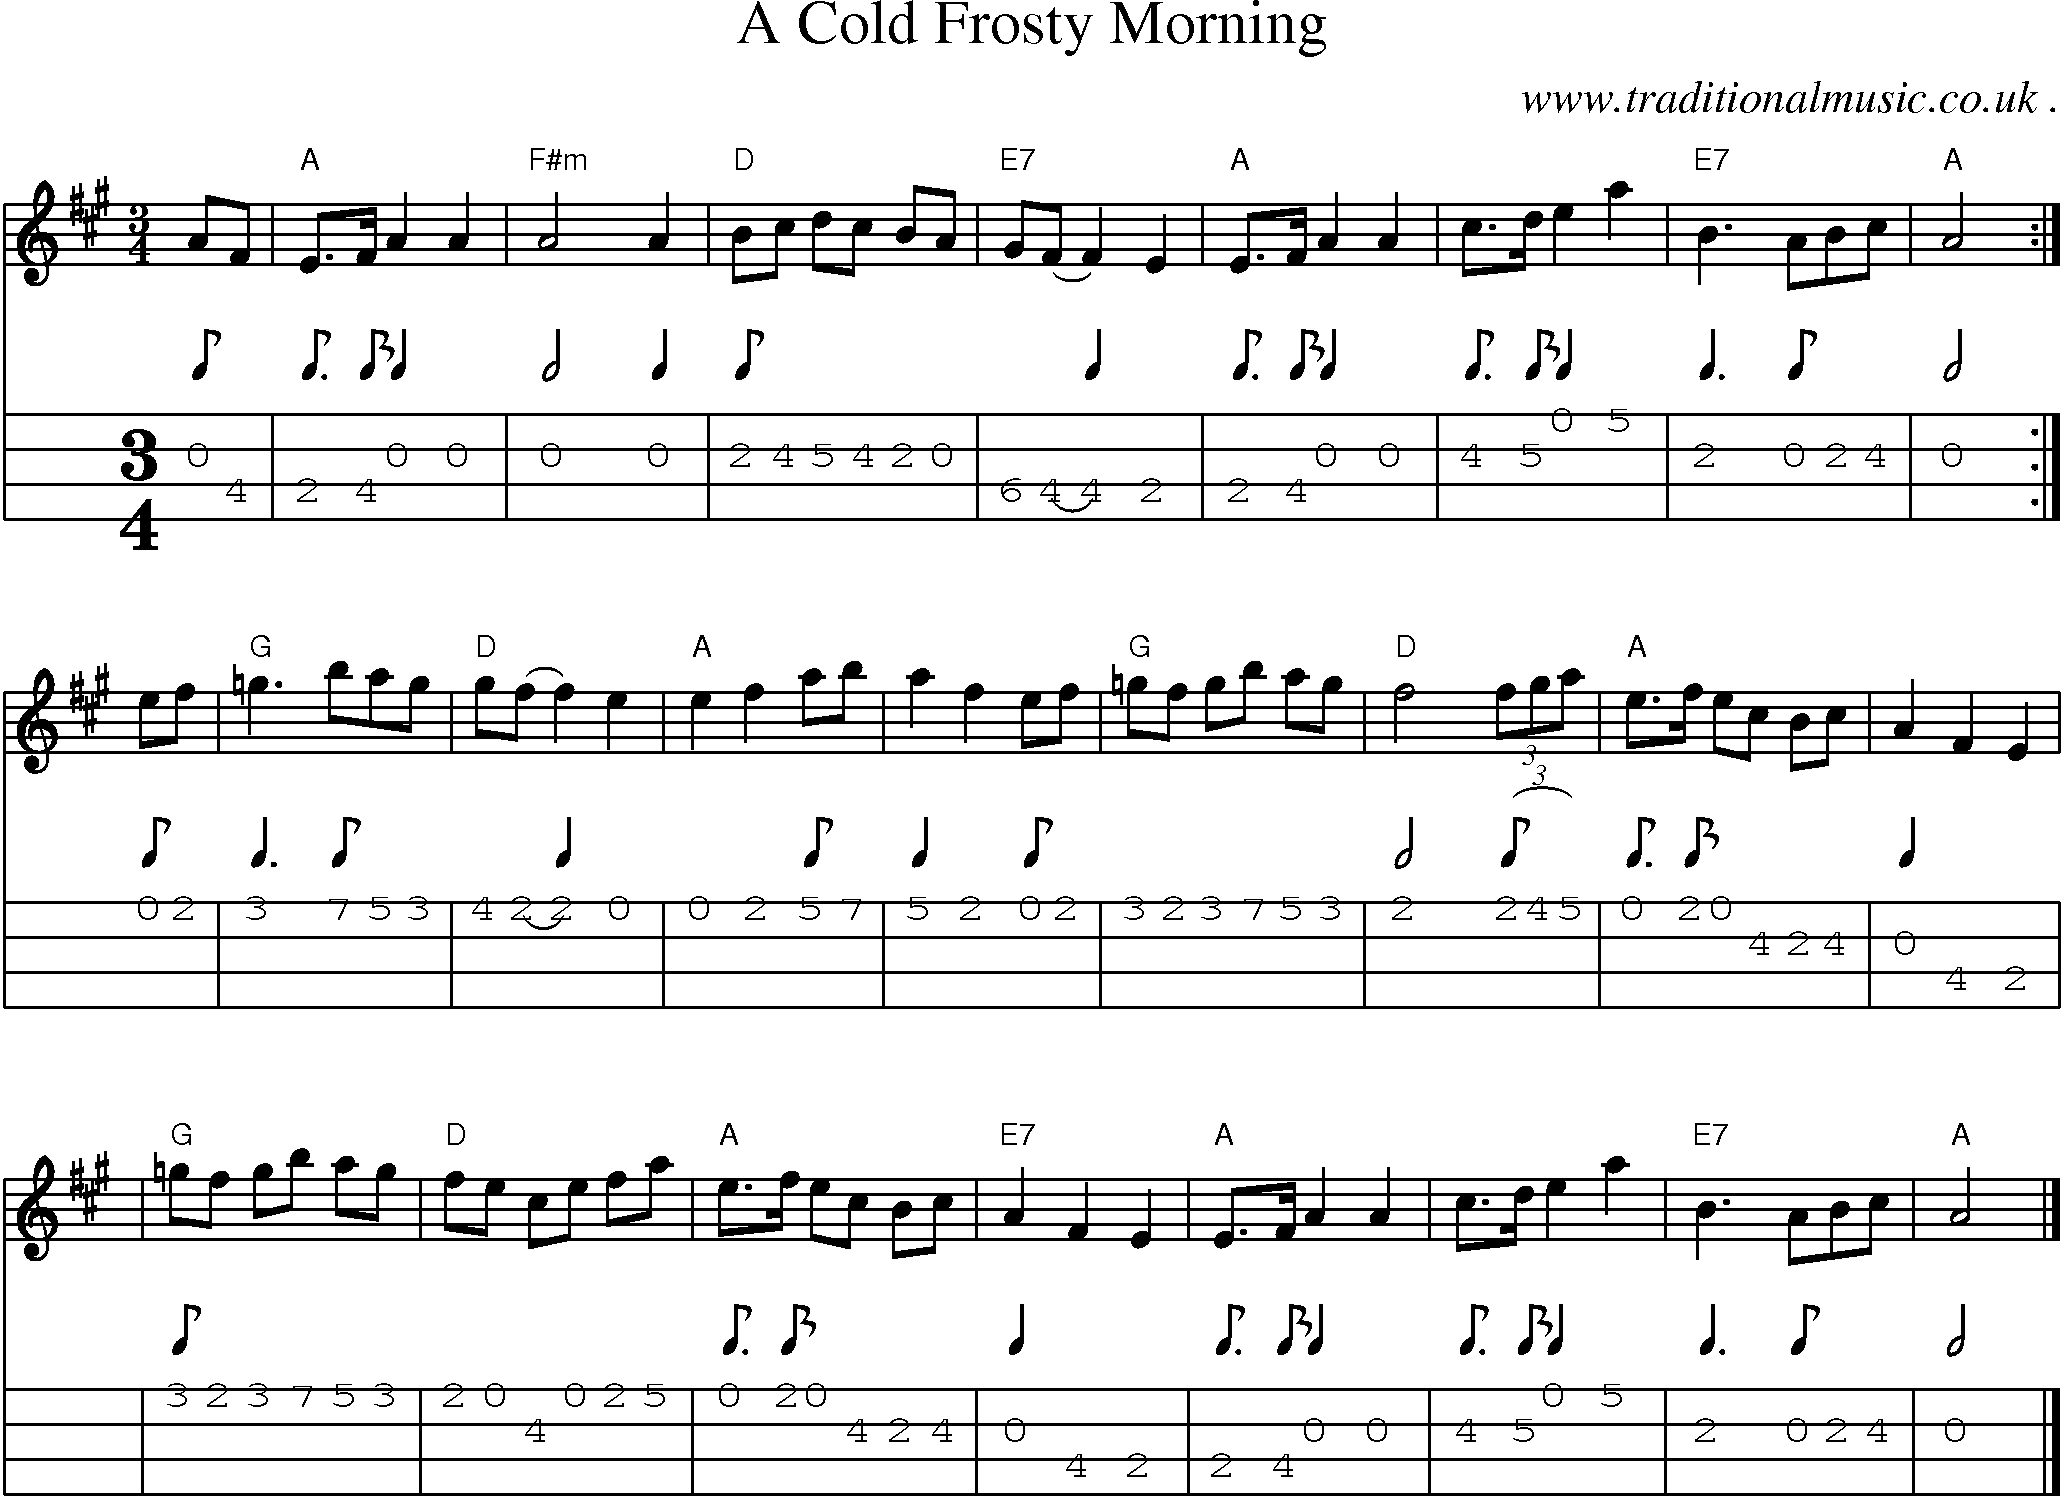 Sheet-music  score, Chords and Mandolin Tabs for A Cold Frosty Morning